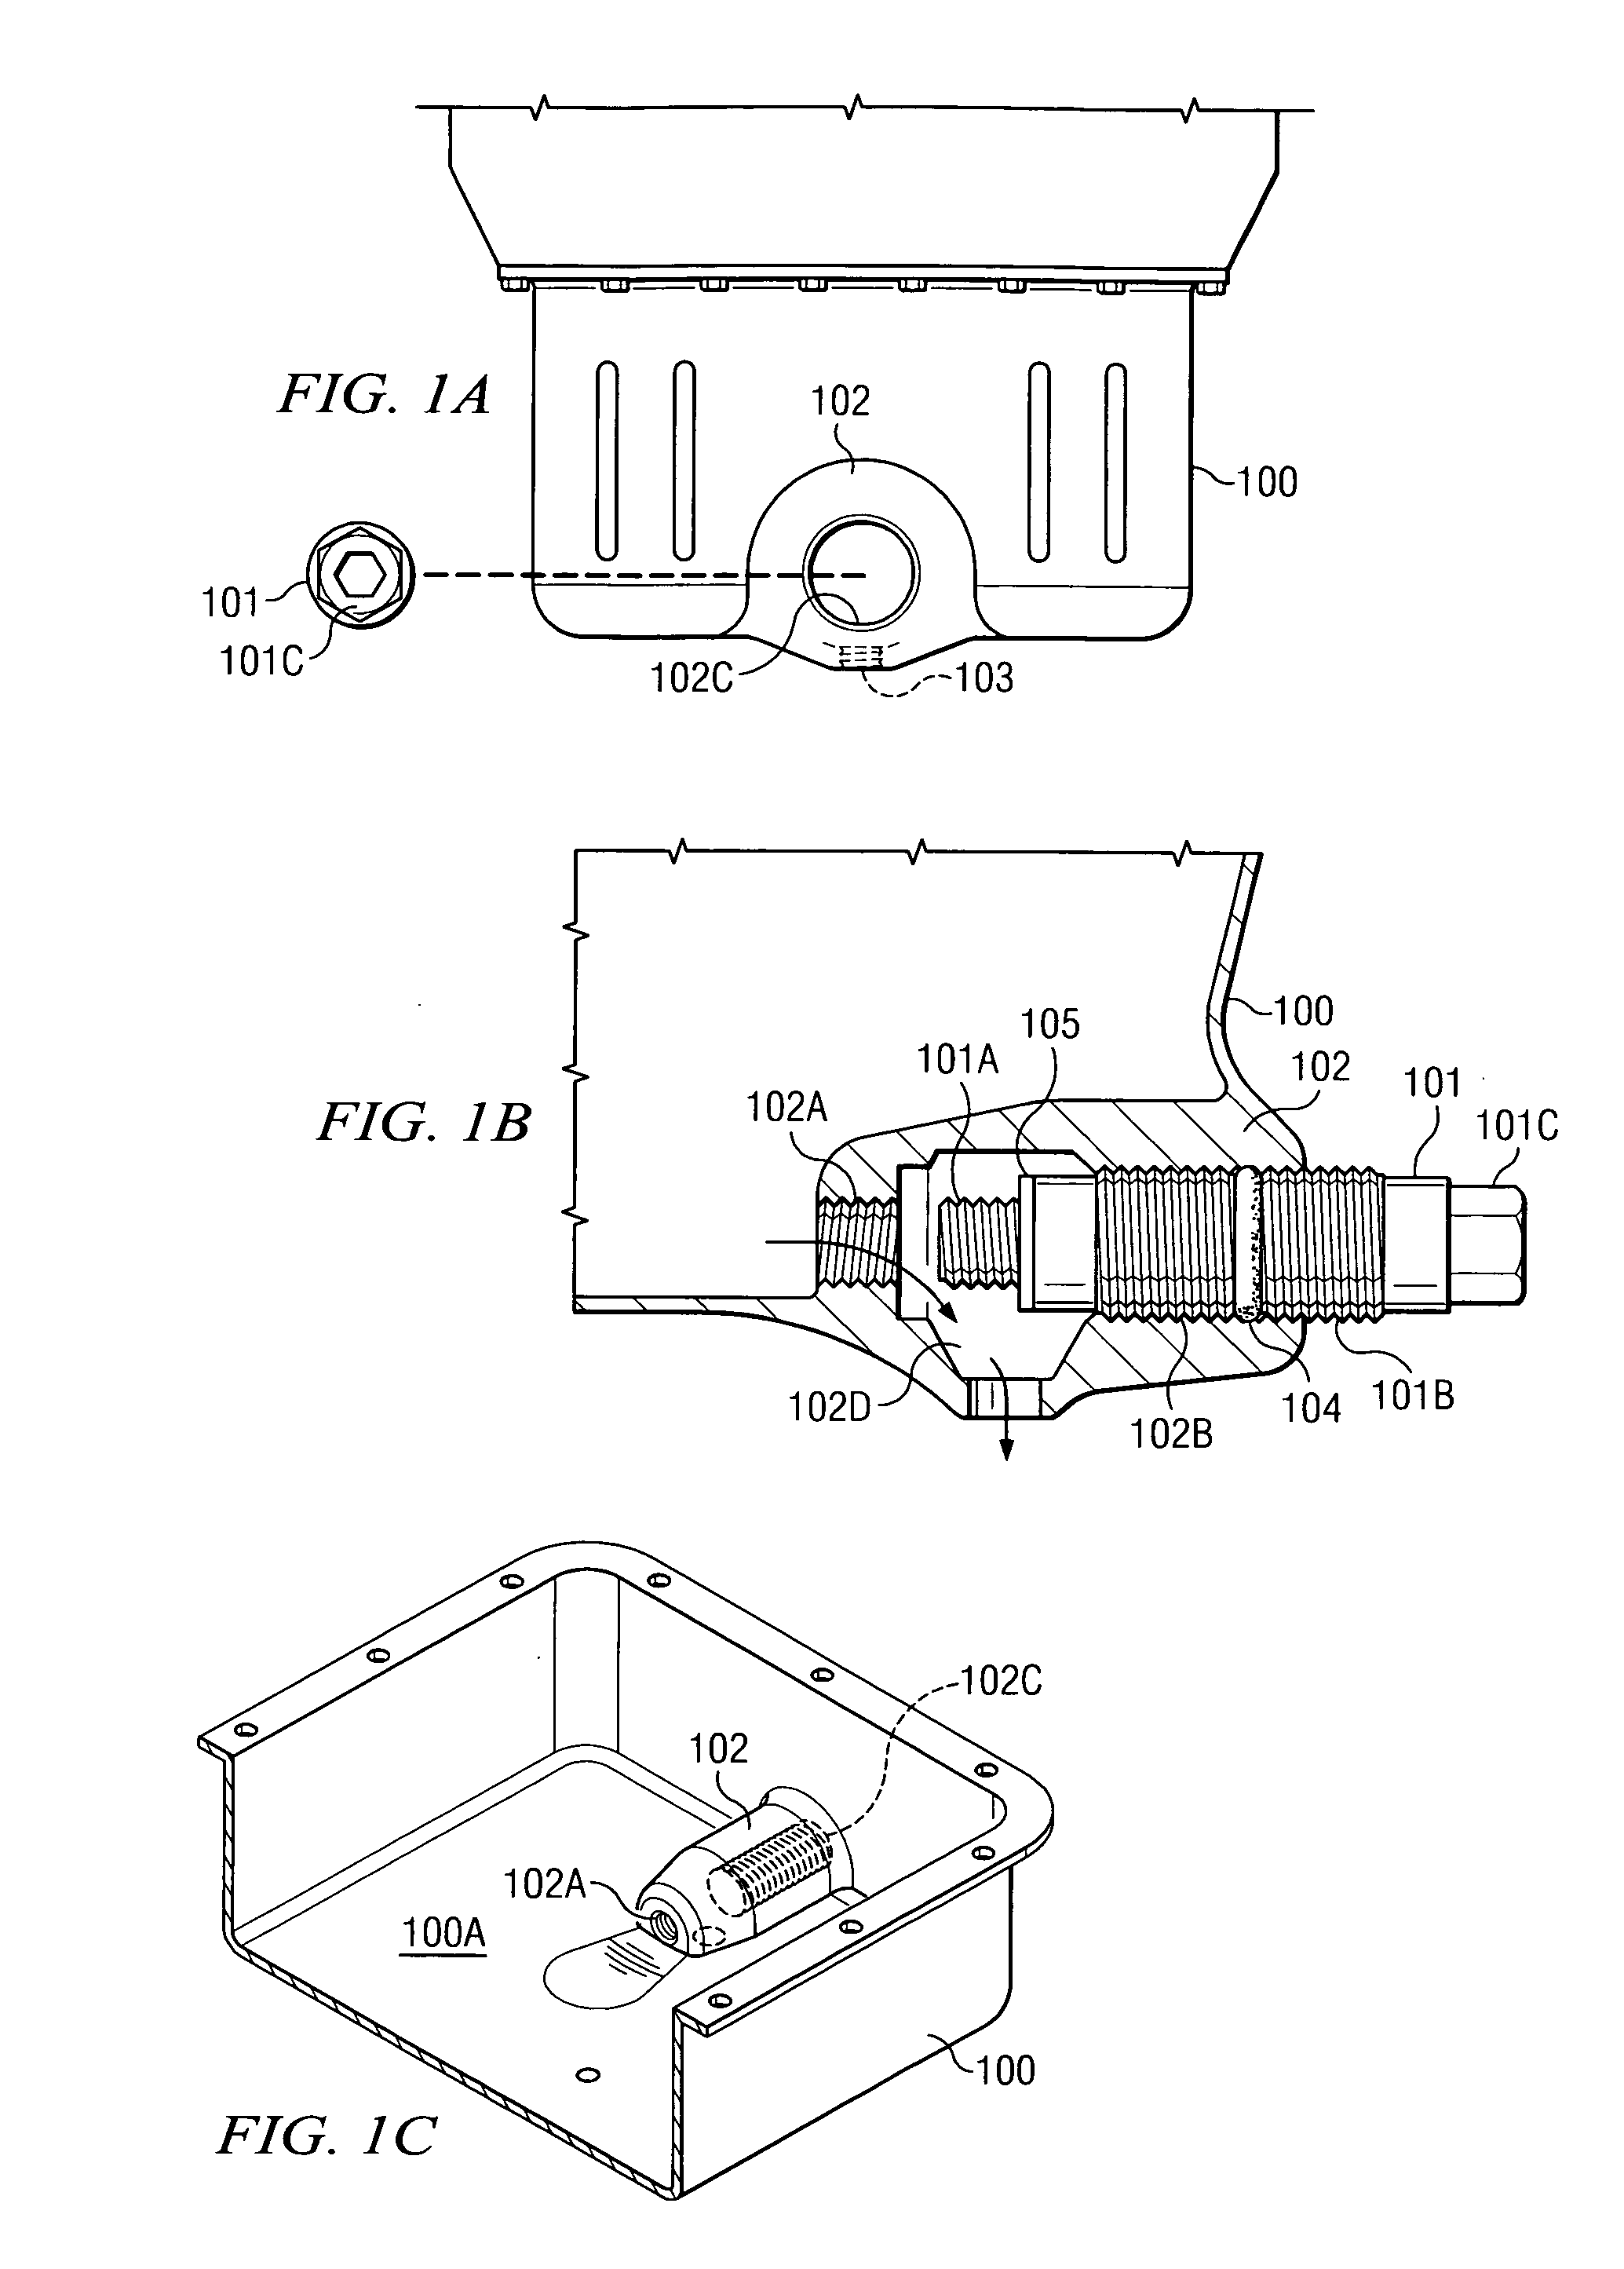 Drain plug housing and drain plug apparatus for use with oil pans